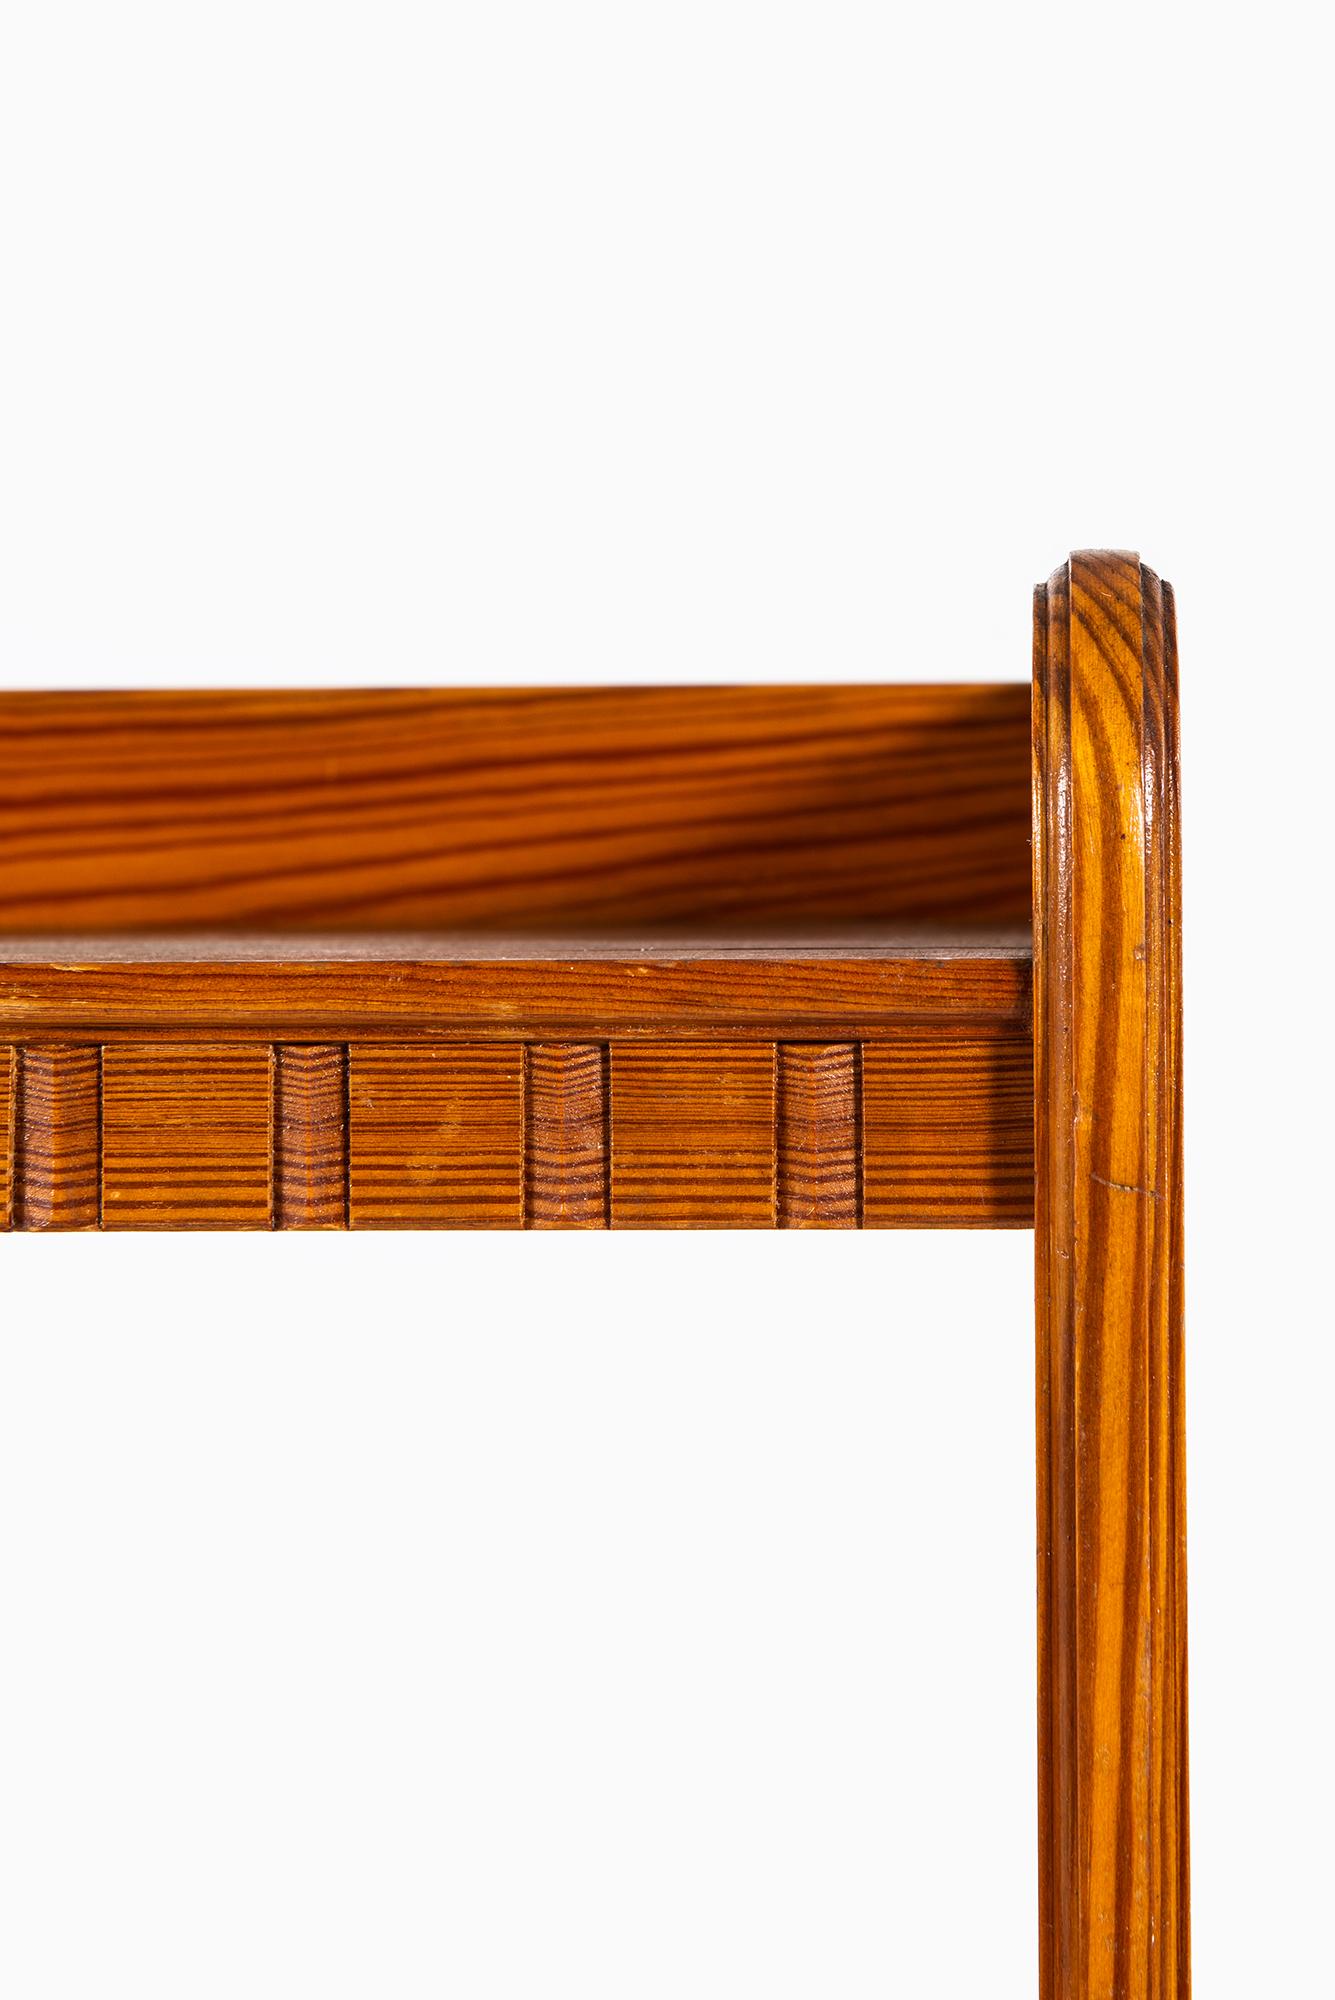 Set of 3 bookcases designed by Martin Nyrop. Produced by Rud Rasmussen in Denmark. Provenance: Copenhagen City Hall.